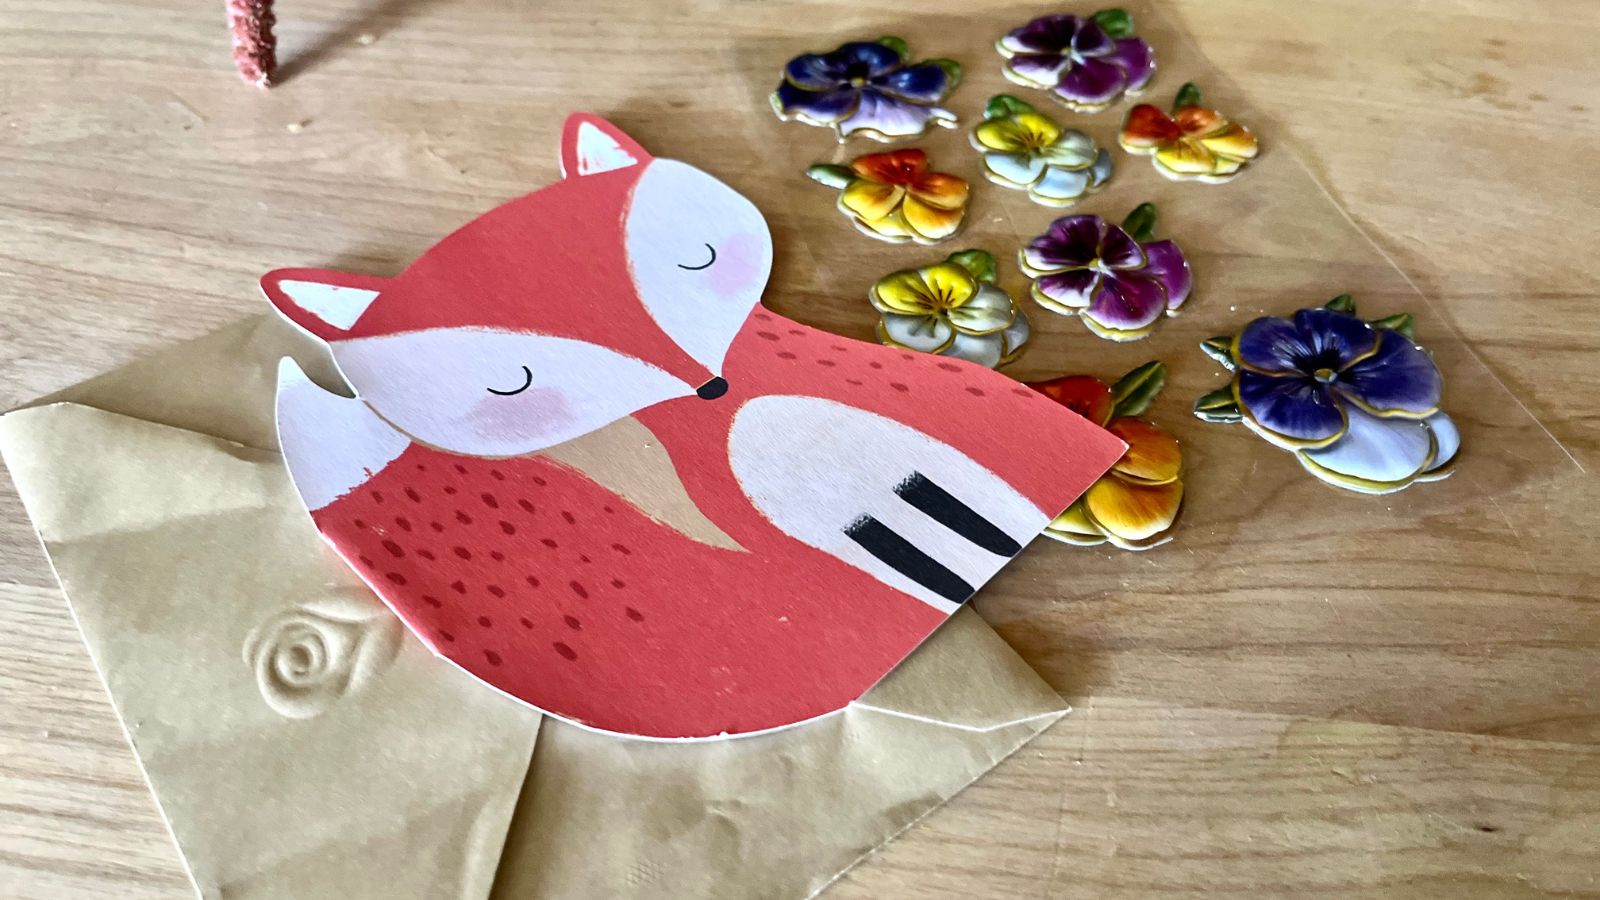 A fox stationary card next to some flat flower stickers that will go inside the envelope